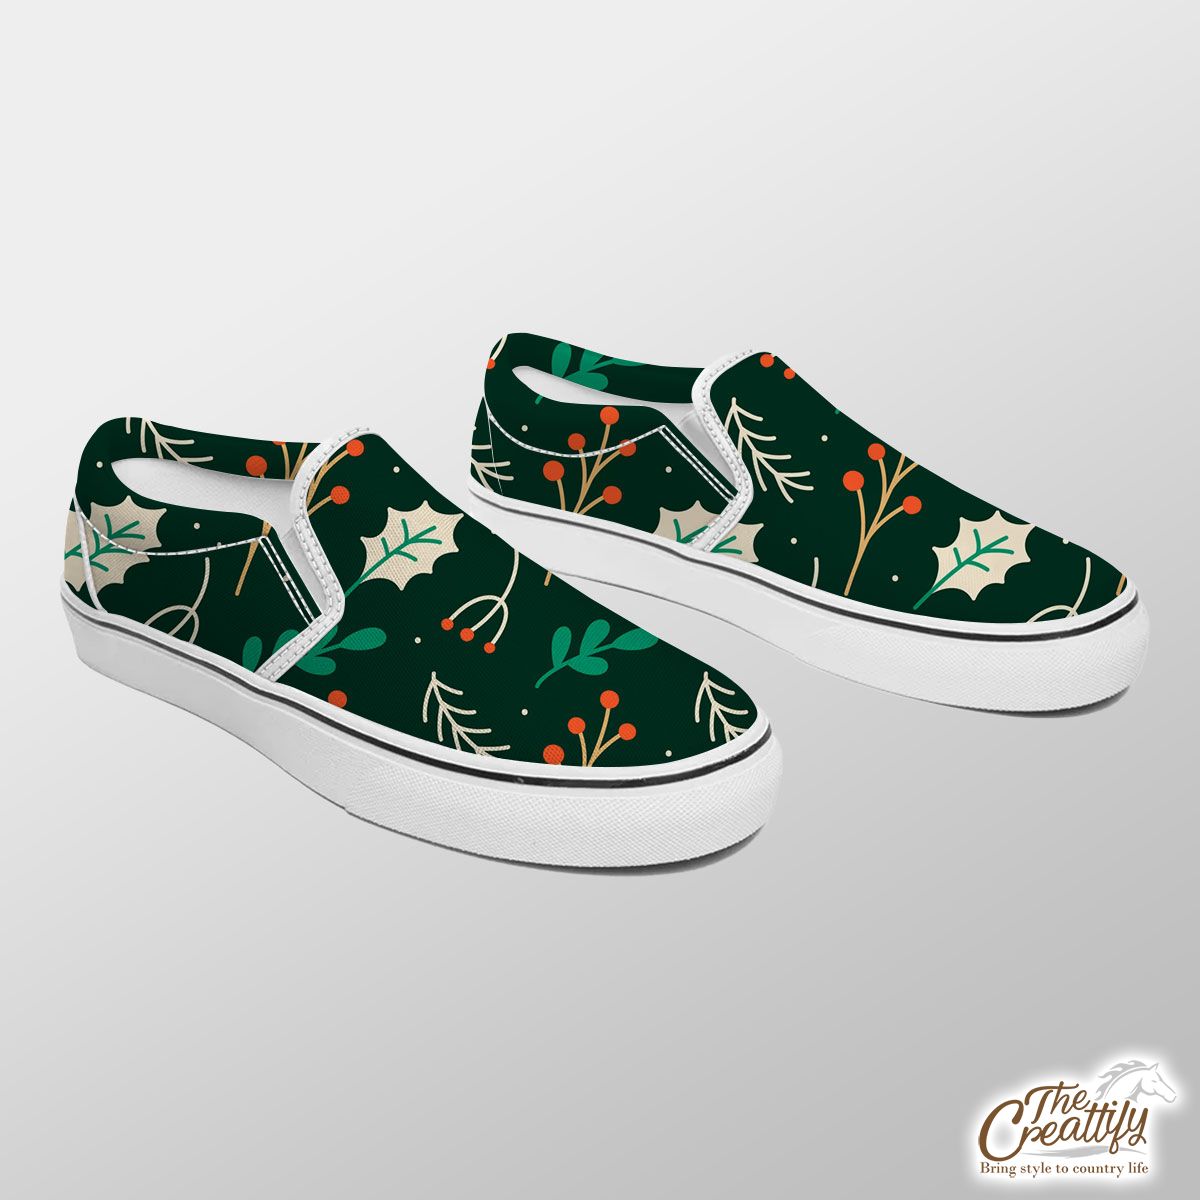 Red Berries And Holly Leaf Pattern Slip On Sneakers